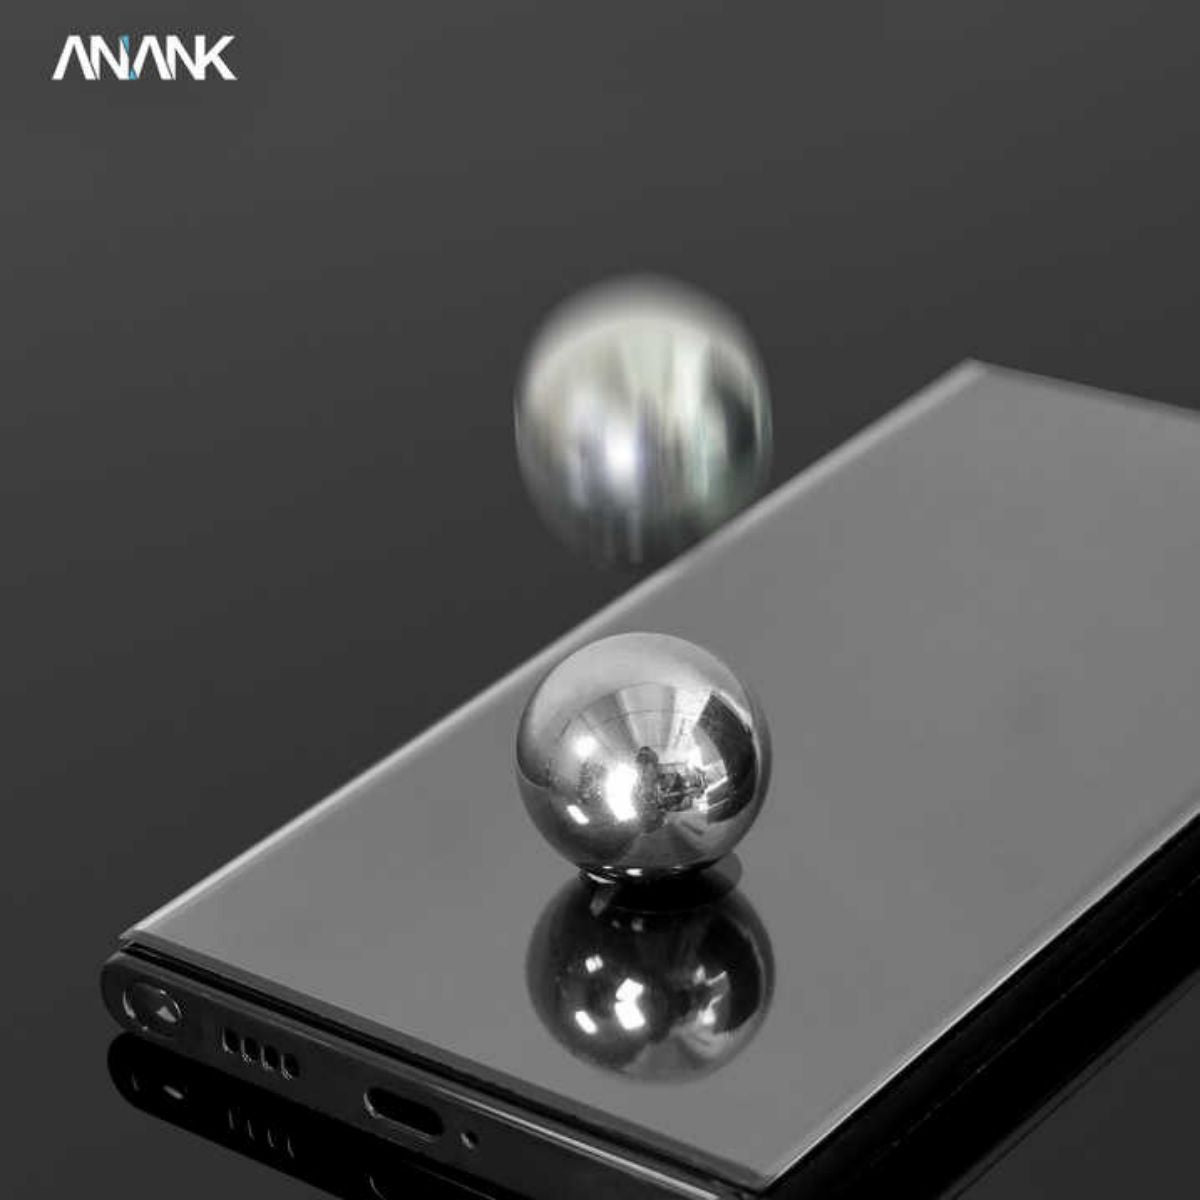 ANANK 3D Full Coverage Screen Protector -Hugmie